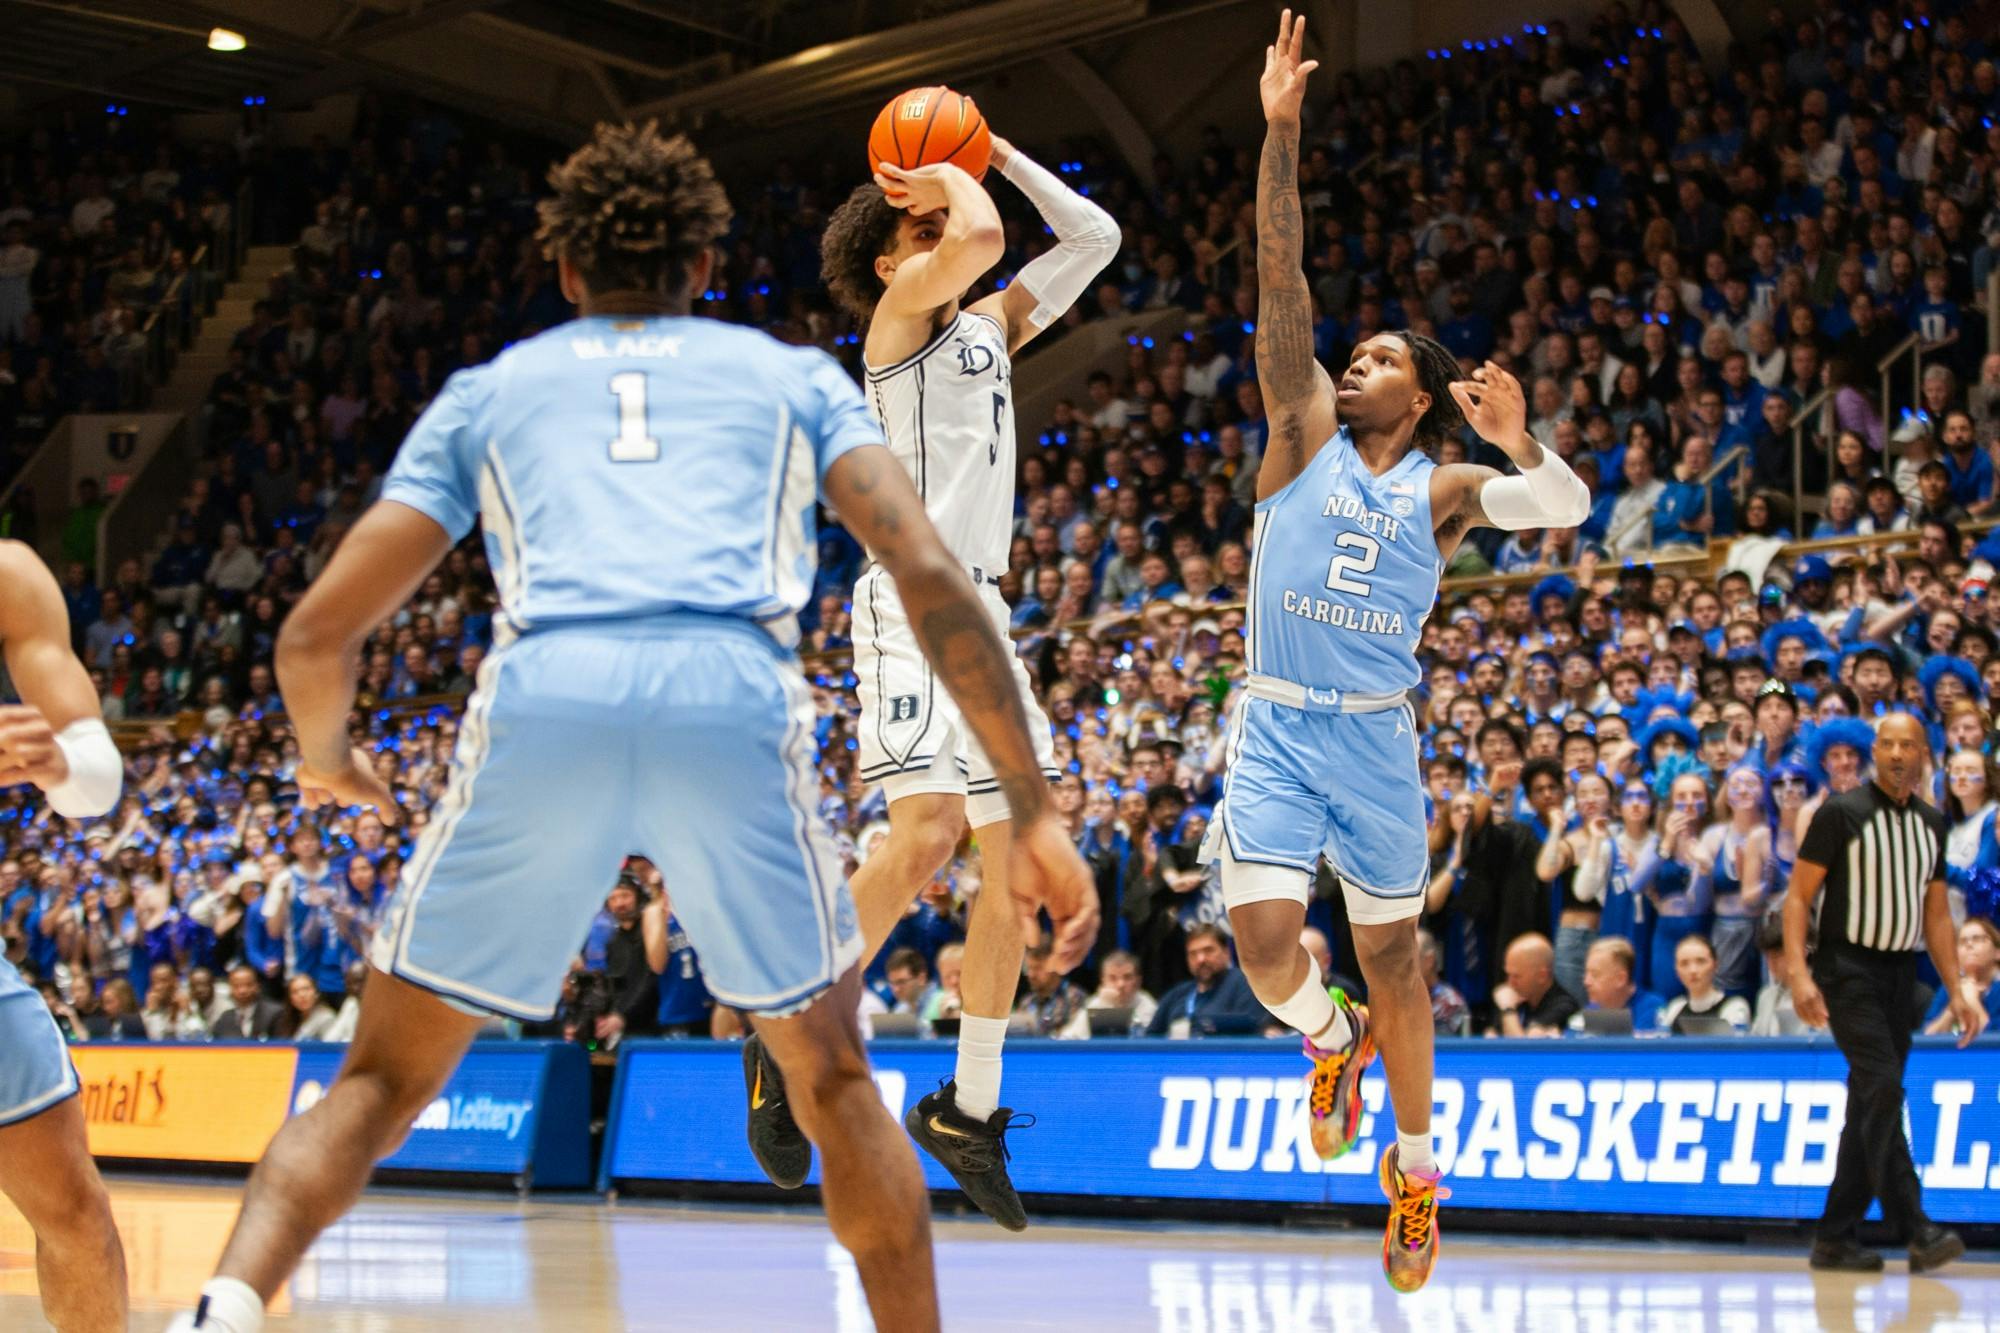 UNC mens basketball loses to Duke in Cameron Indoor, 63-57, in first game of Scheyer era